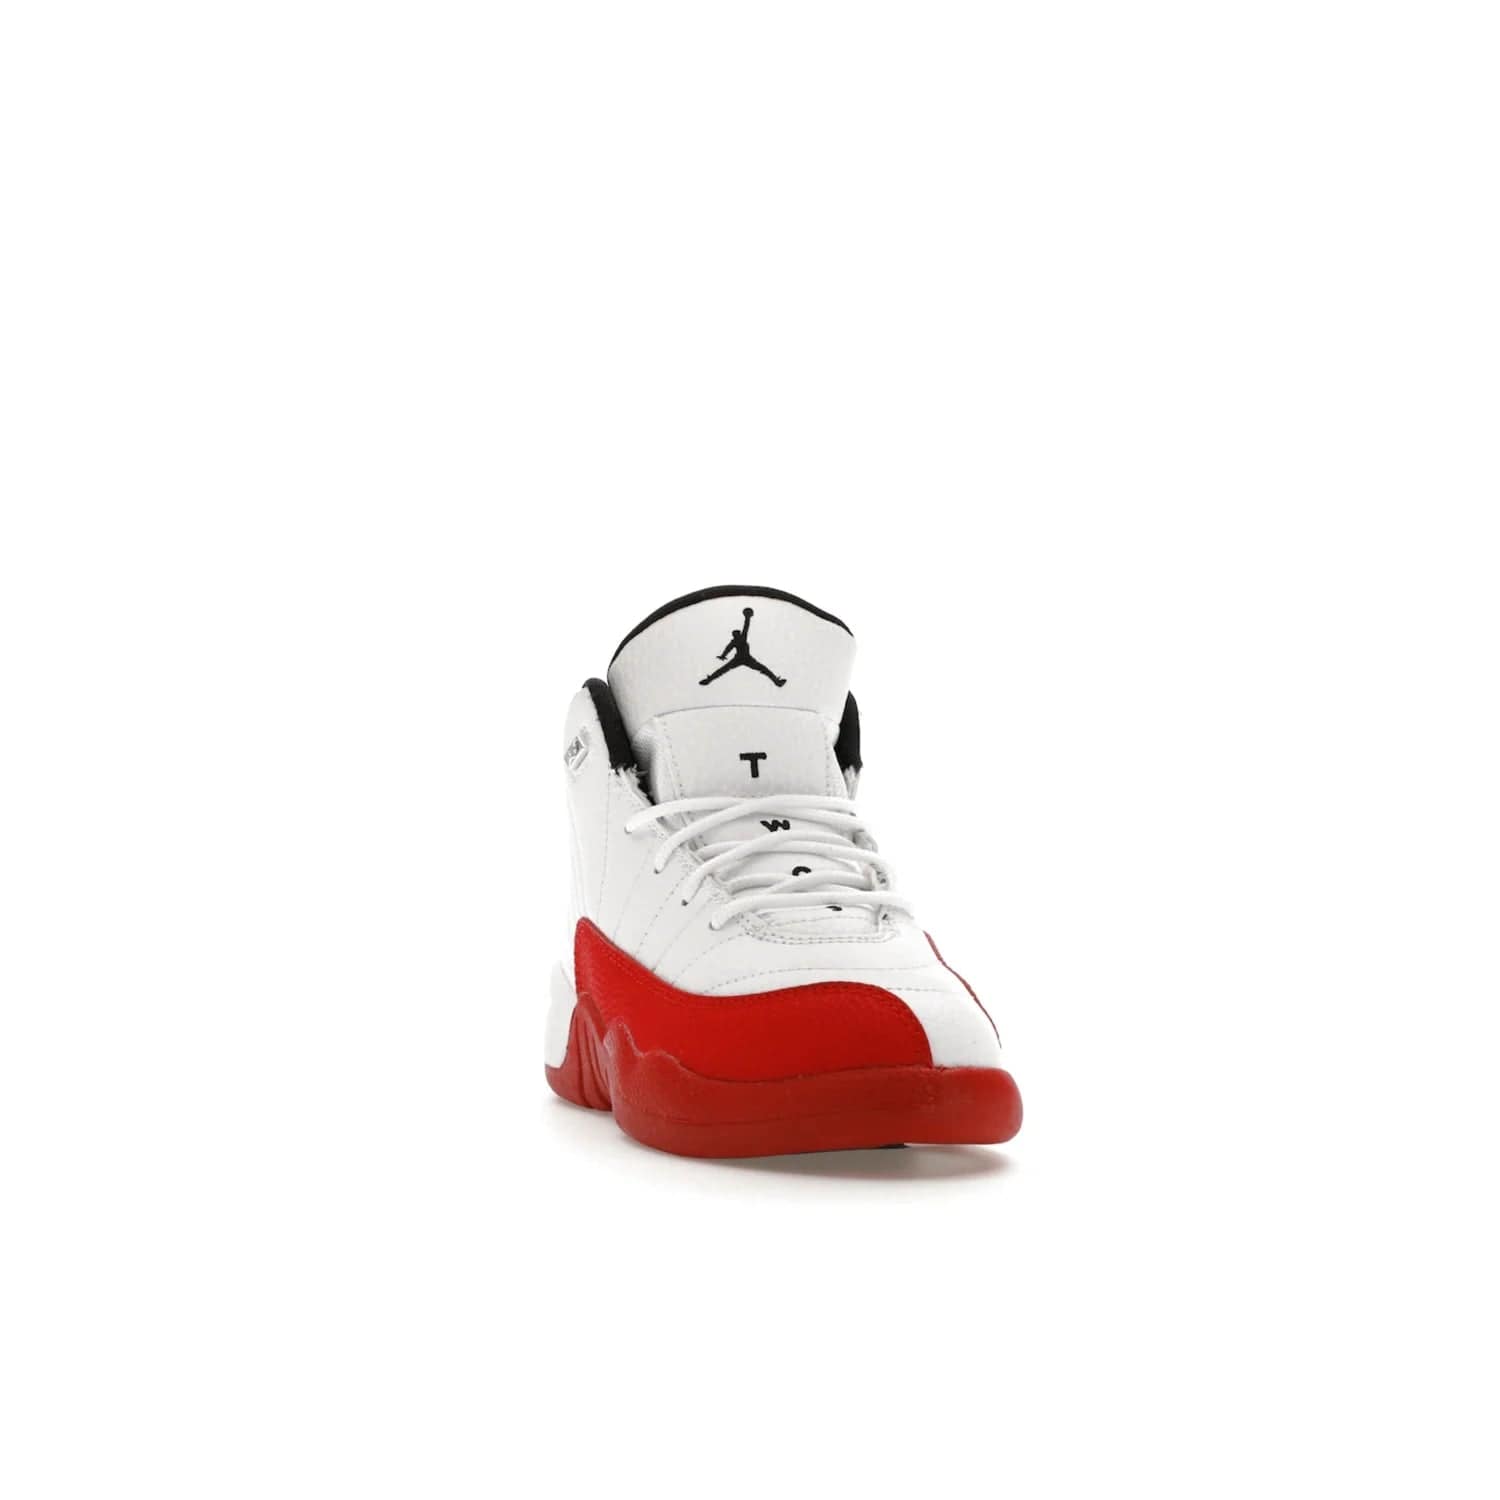 Jordan 12 Retro Cherry (2023) (PS) - Image 8 - Only at www.BallersClubKickz.com - Jordan 12 Retro Cherry dropping for toddlers in 2023! White leather upper with black overlays and red branding. Classic court style for your little one.